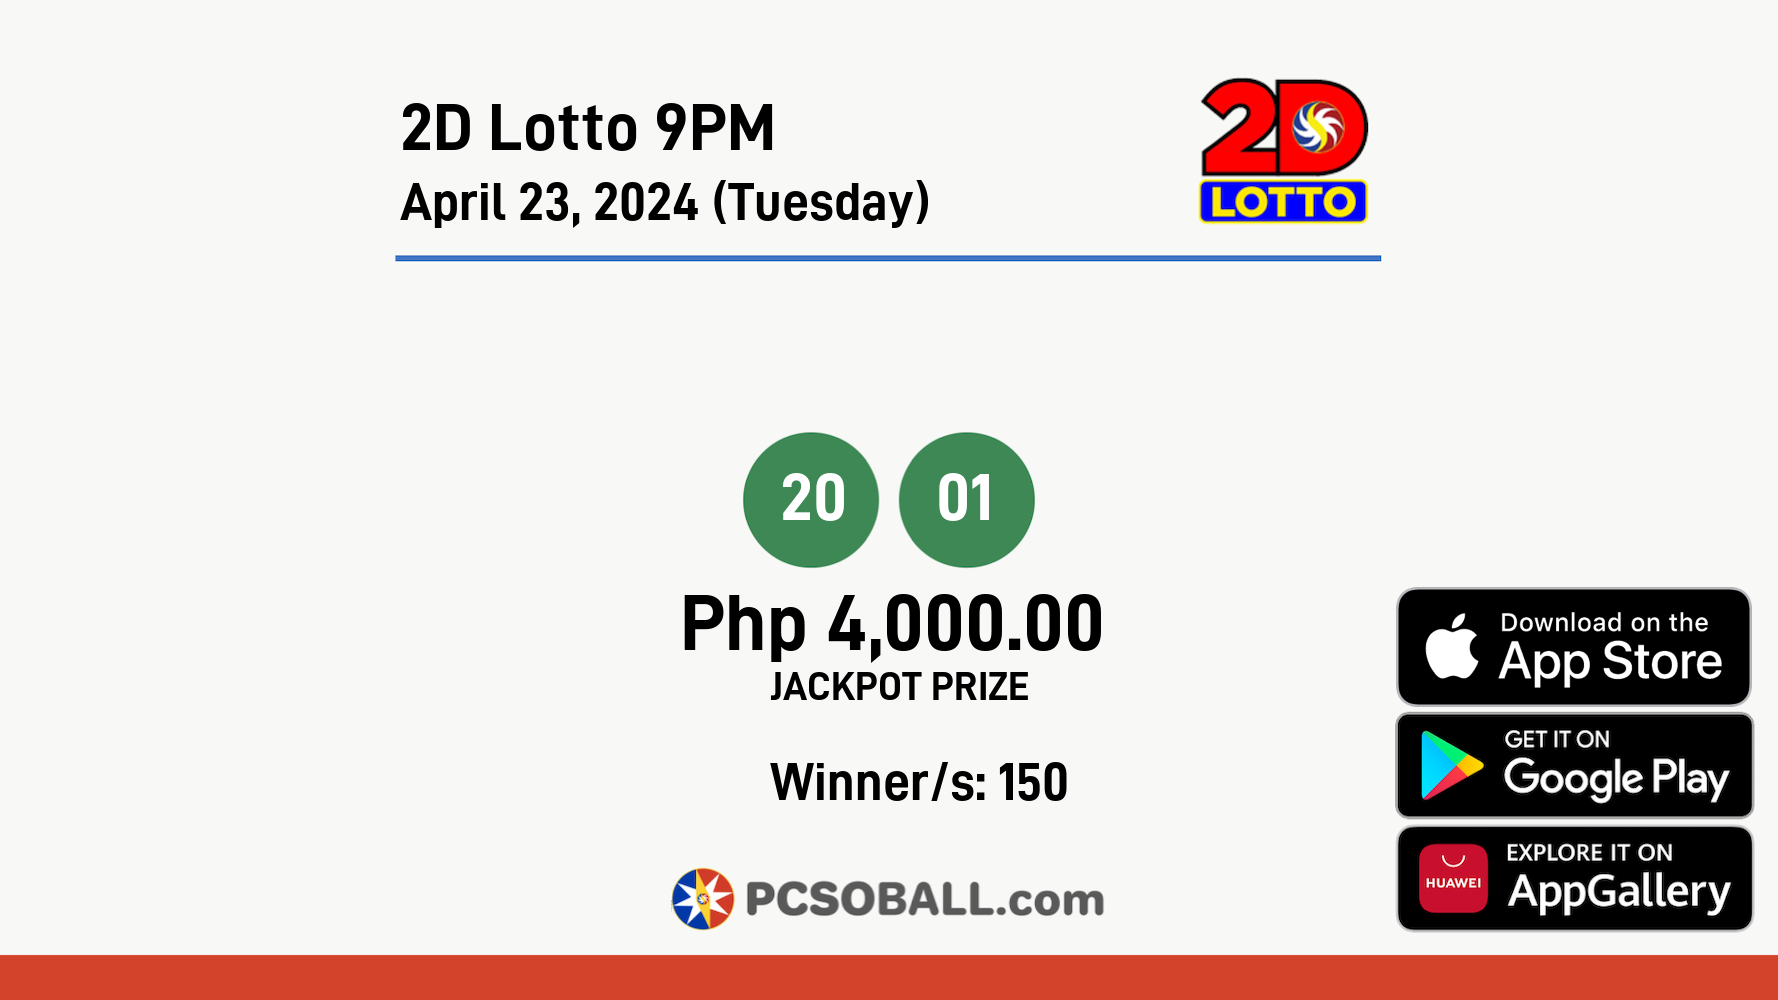 2D Lotto 9PM April 23, 2024 (Tuesday) Result